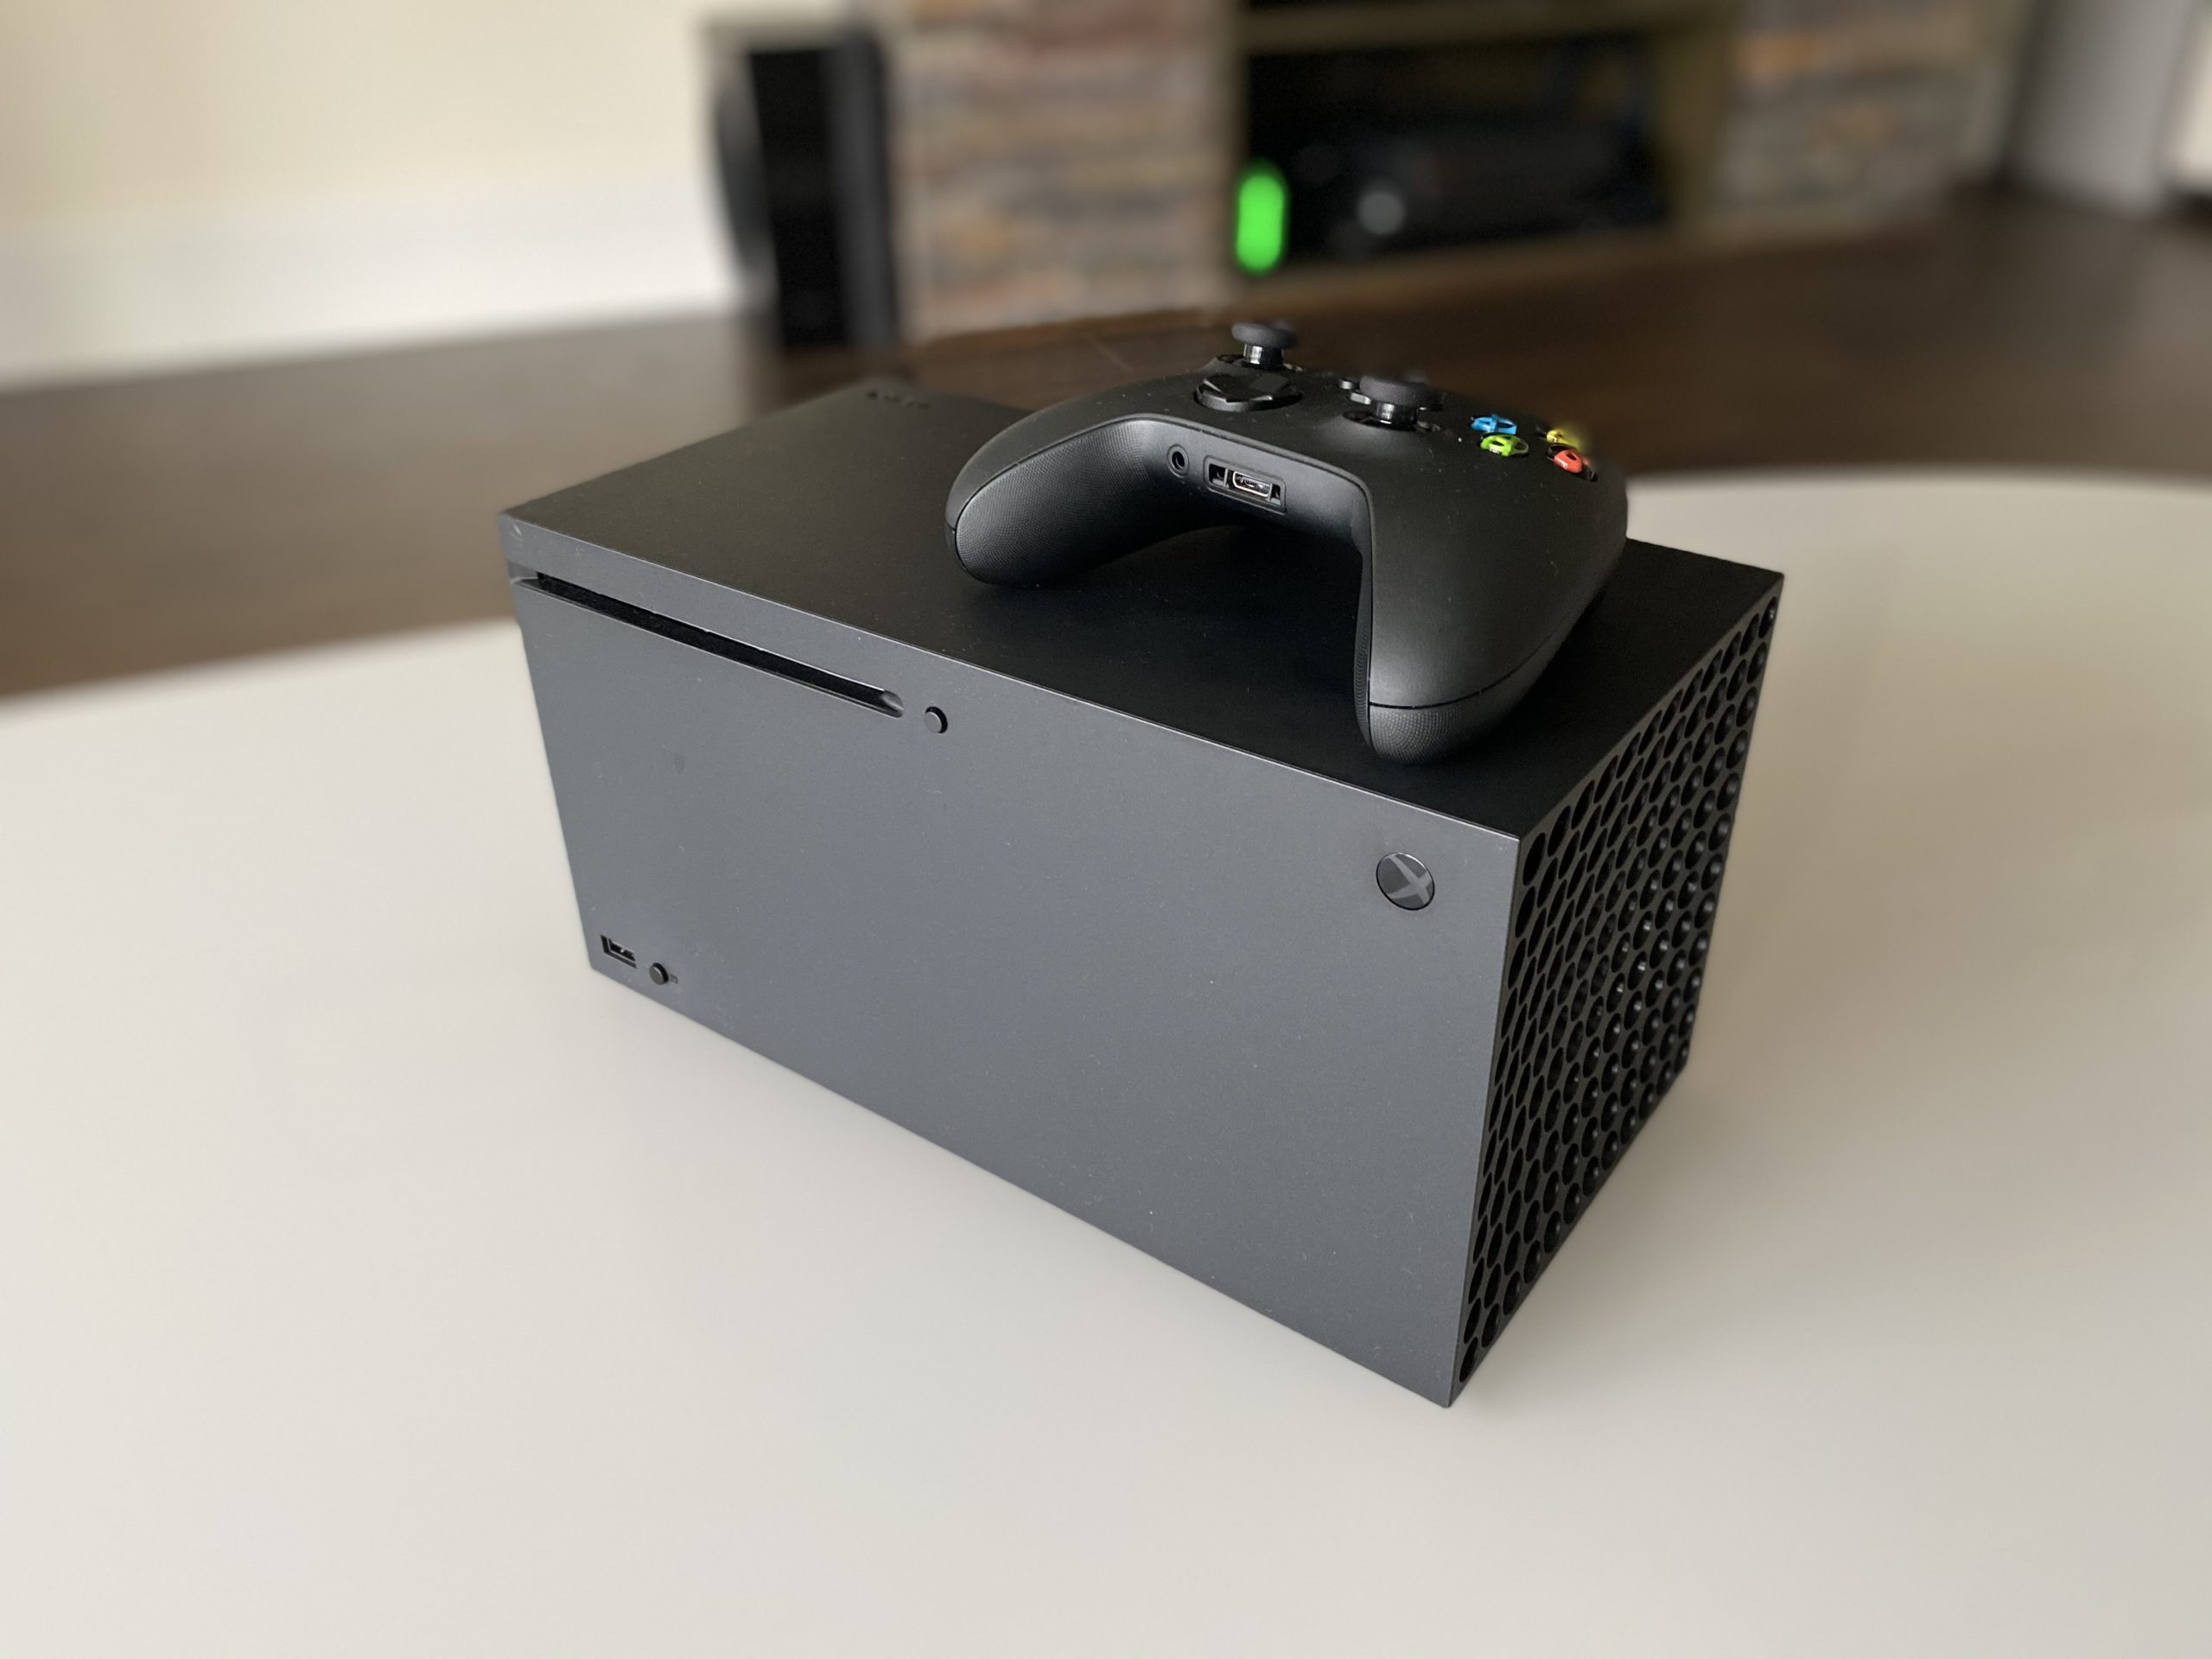 currys pre order xbox series x